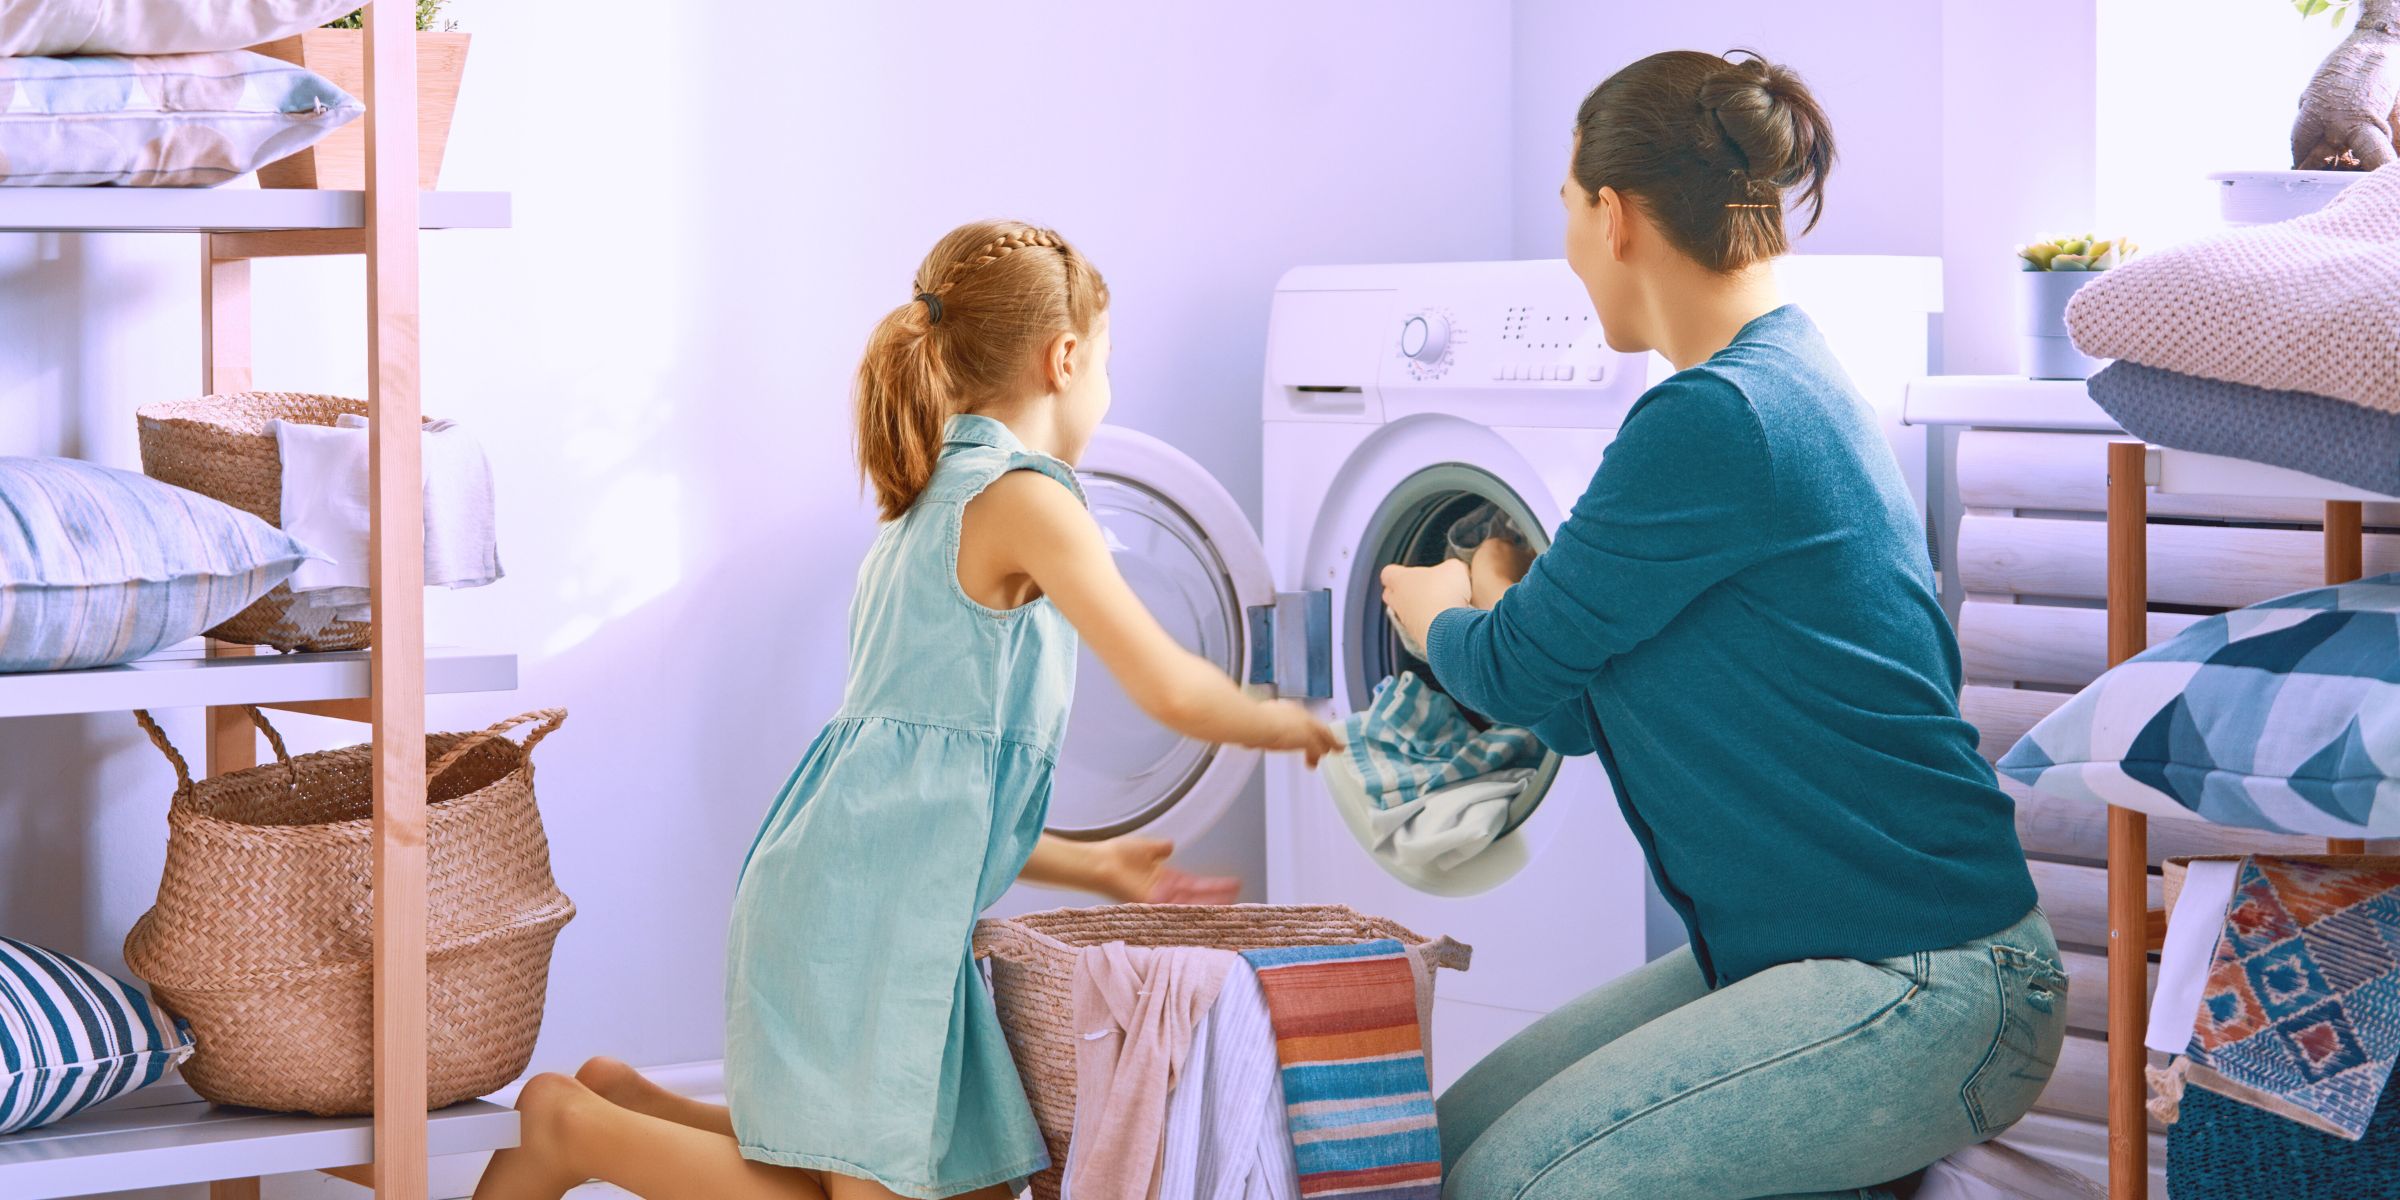 woman strengthening emotional ties with her daughter by teaching her chores like doing laundry